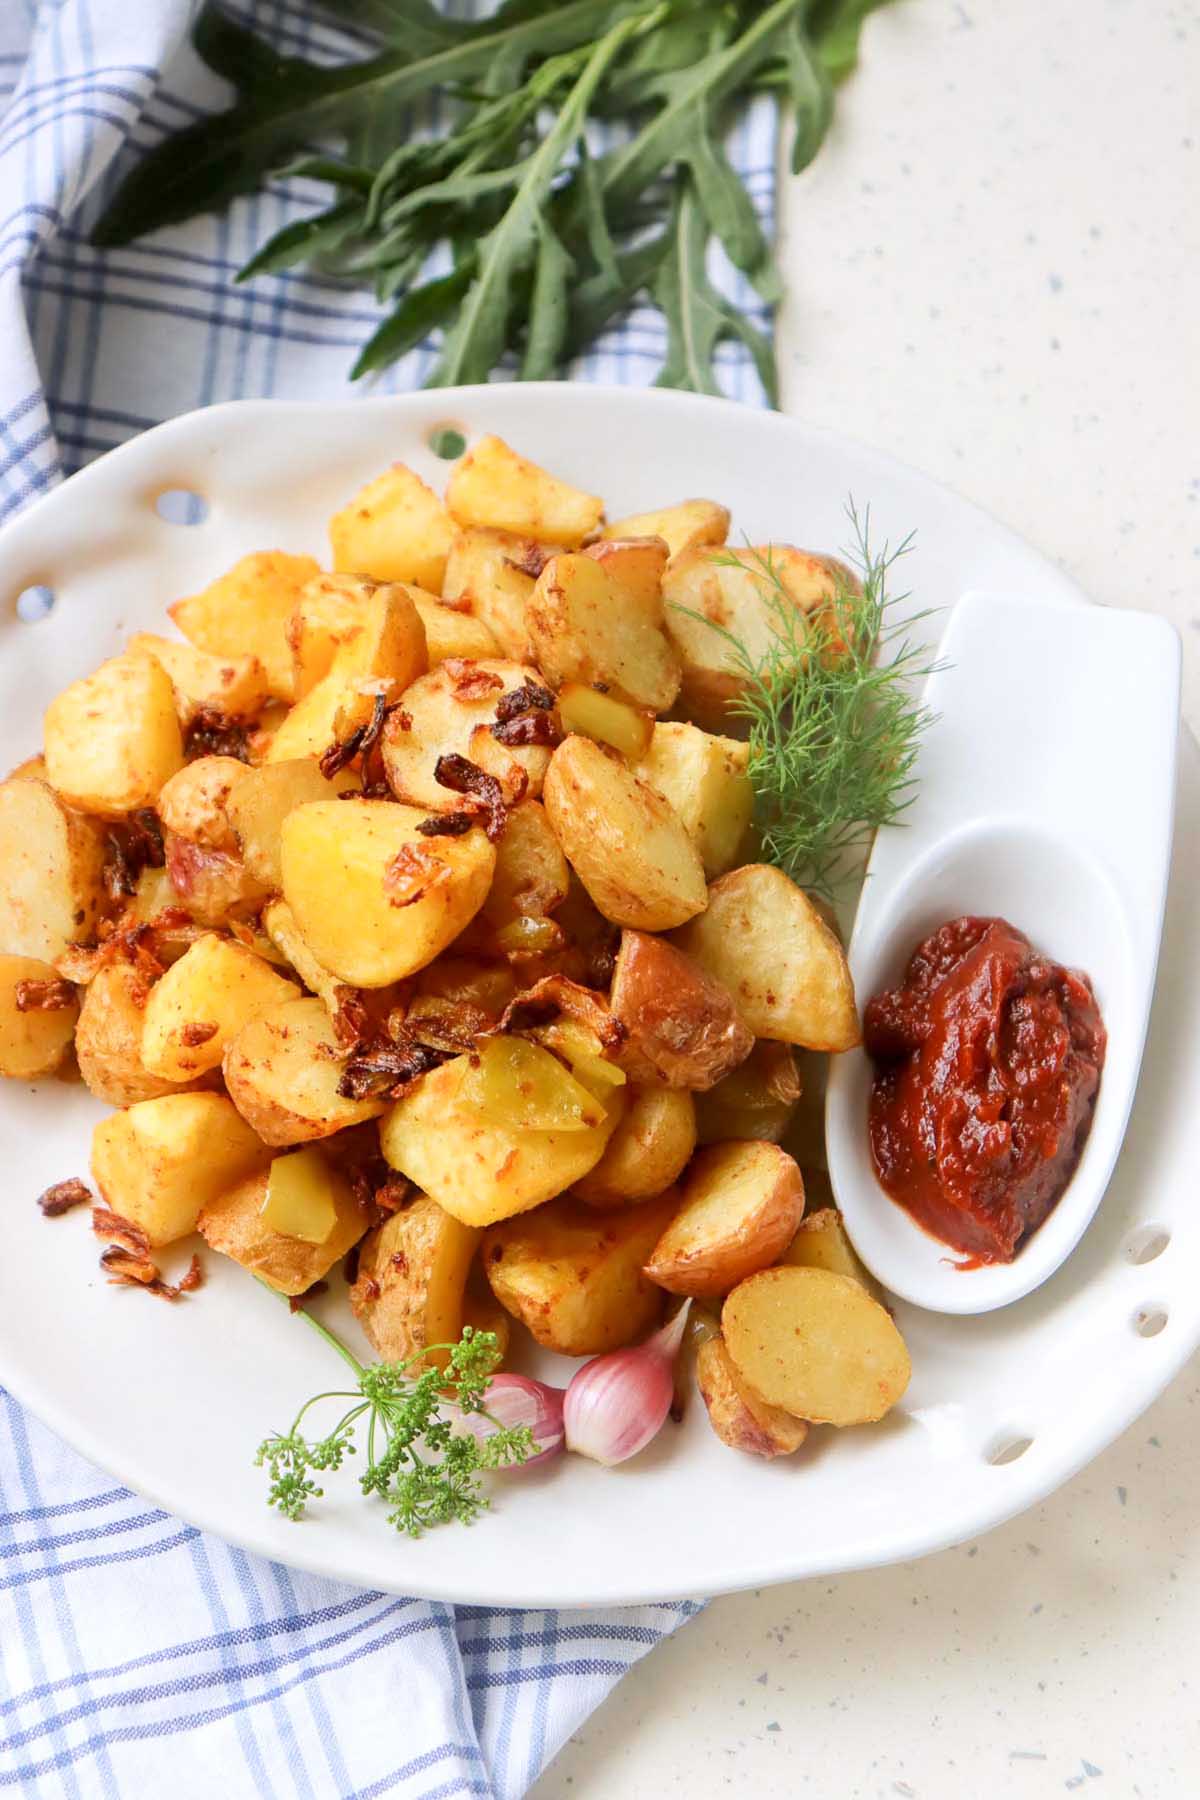 Potatoes on a white plate.